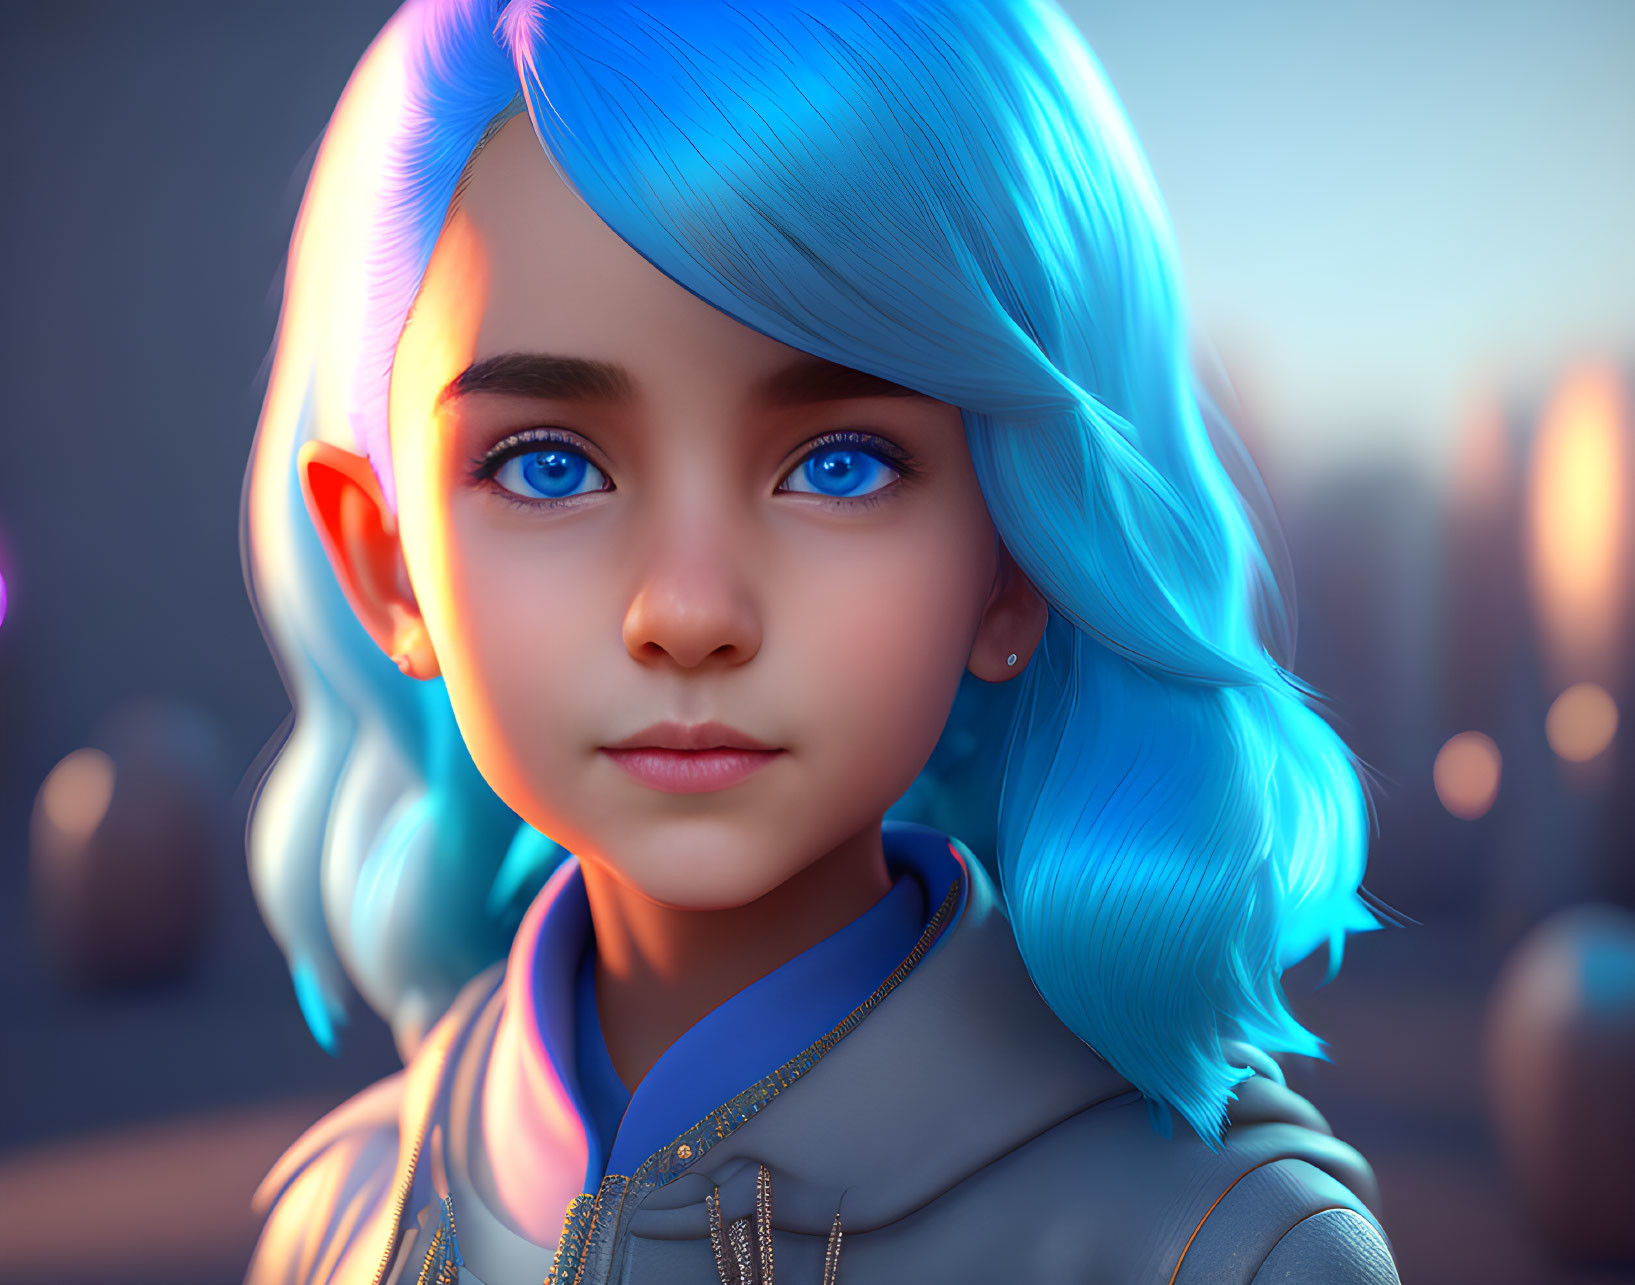 Vibrant Blue Hair and Eyes in Detailed Digital Portrait